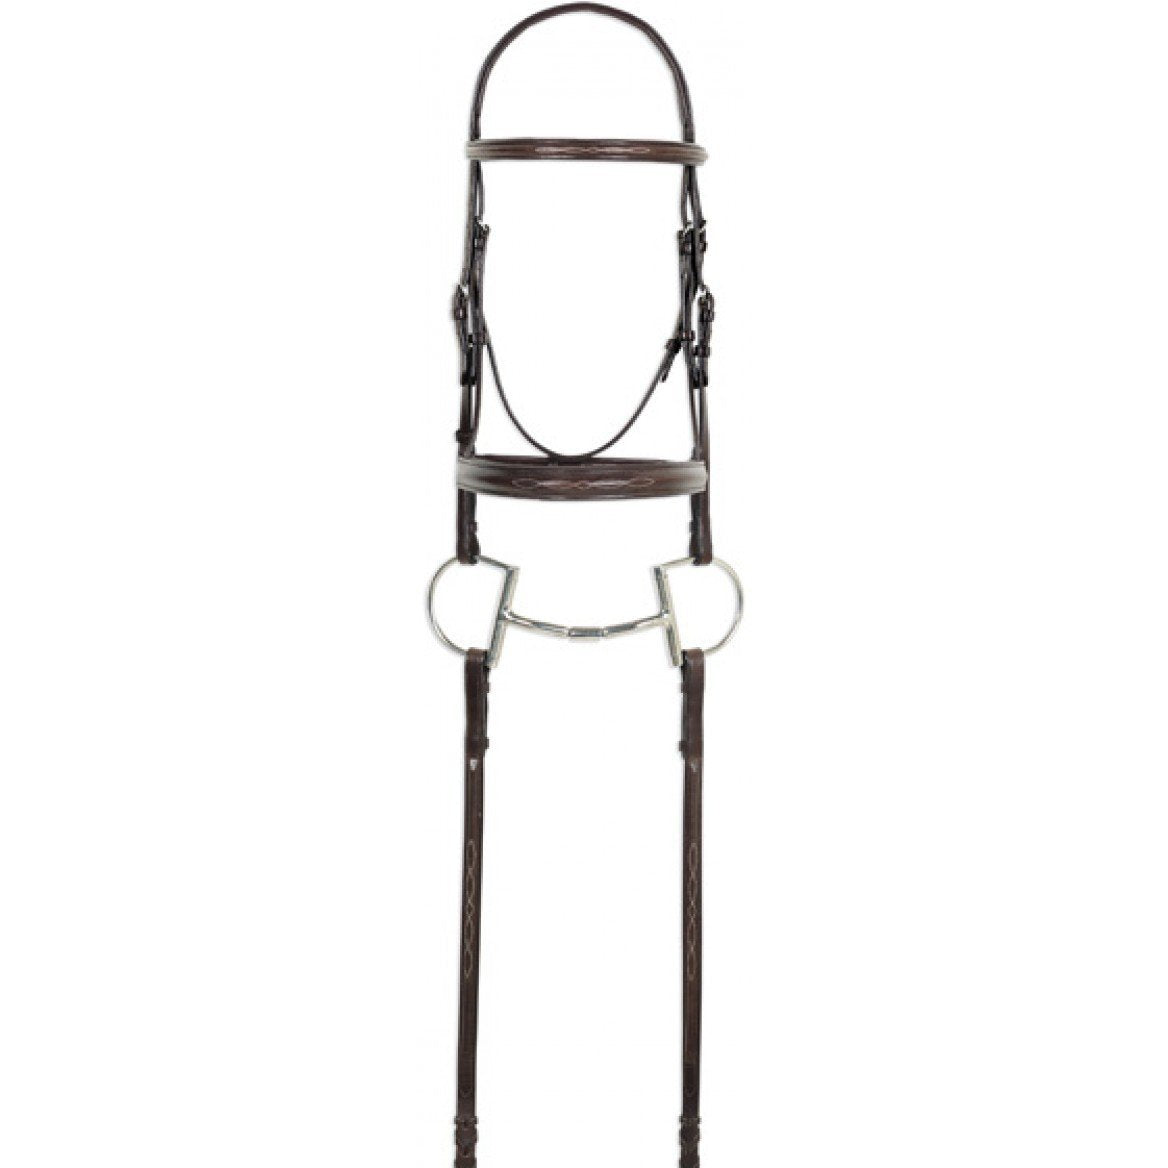 Ovation Classic Collection - Fancy Raised Comfort Crown Padded Bridle With Fancy Raised Laced Reins - West 20 Saddle Co.